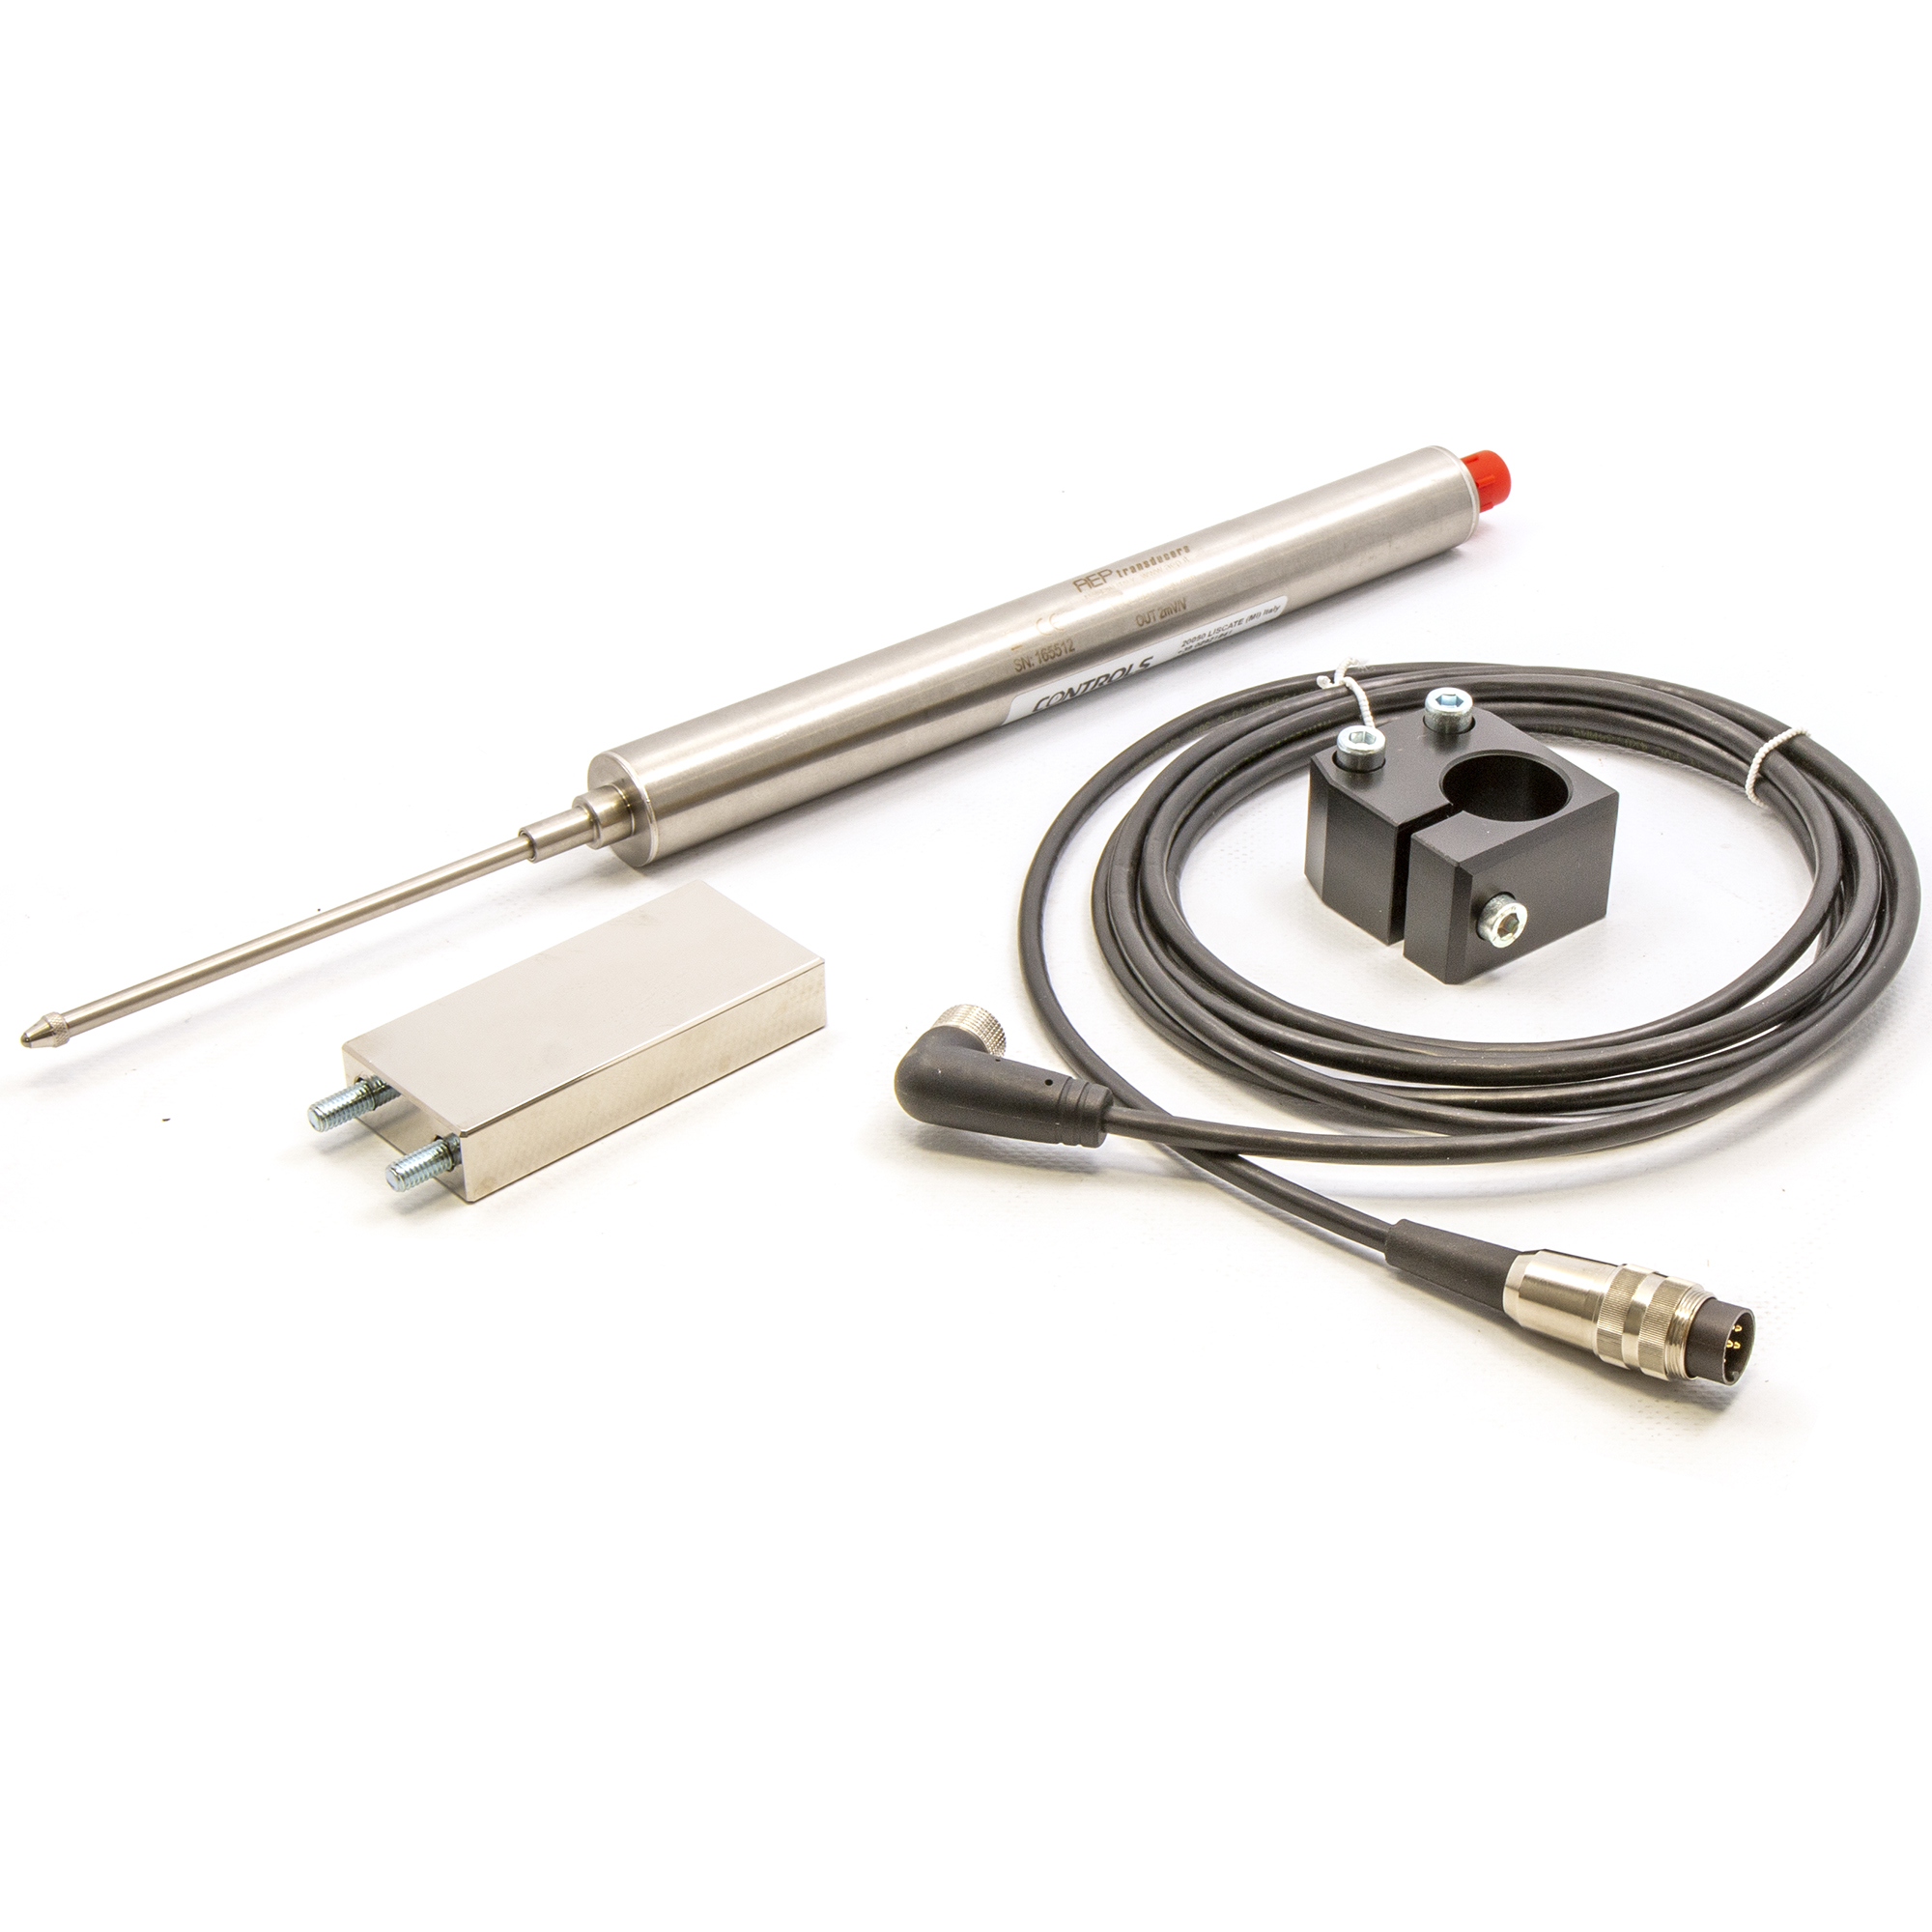 CONT 50-C1500/9 Displacement transducer 100 mm travel for measuring the piston travel.